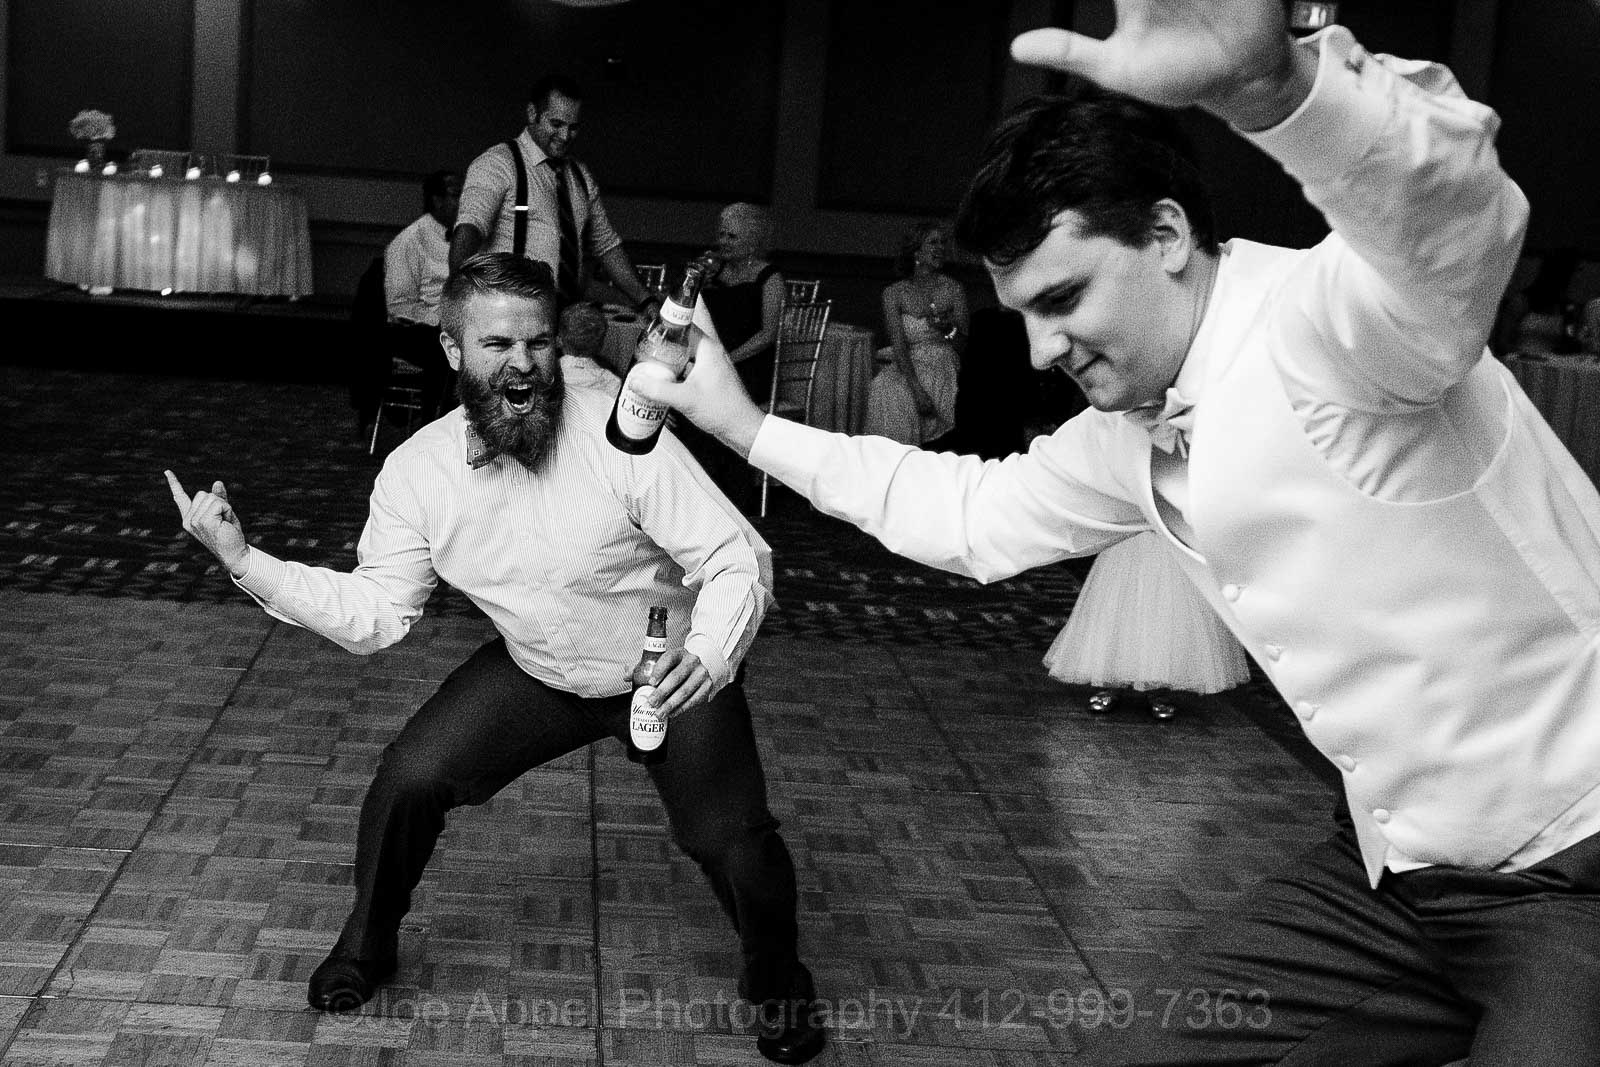 A bearded man yells as another man in a white dress and bow tie dances.